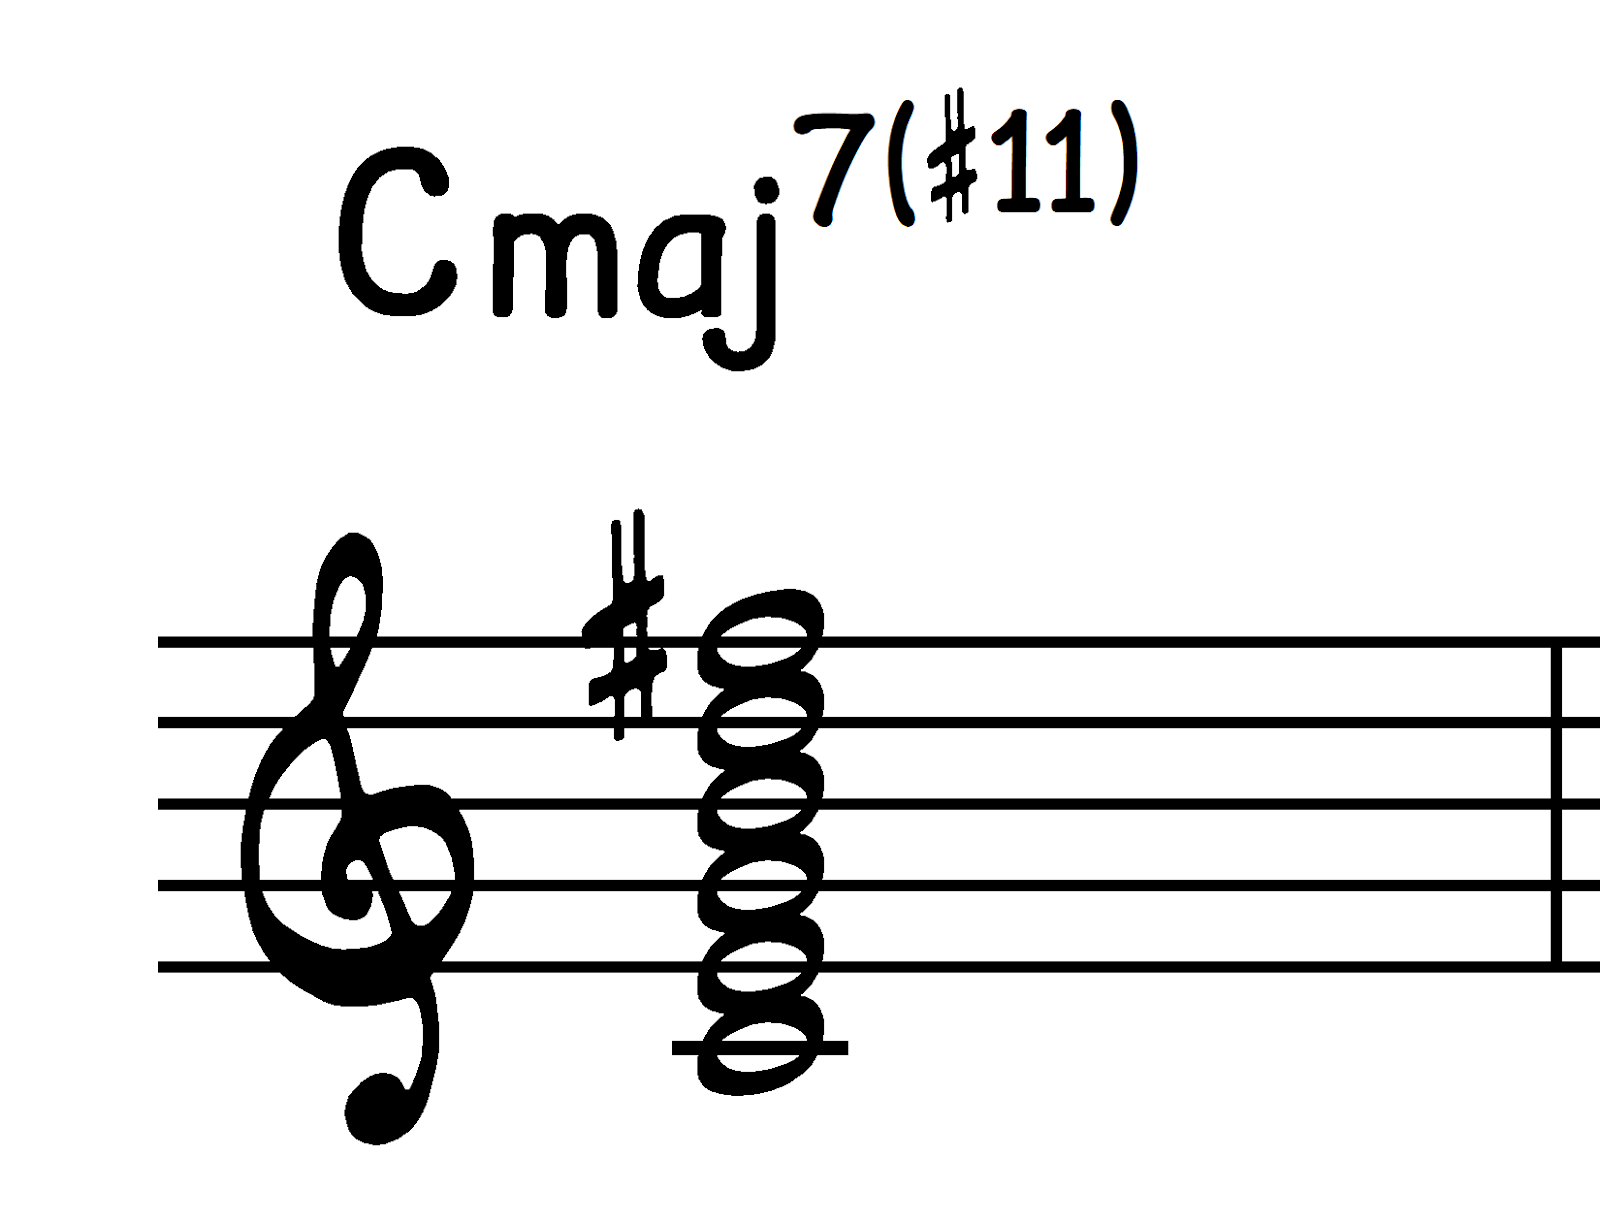 A Cmaj7#11 chord in close root position. 